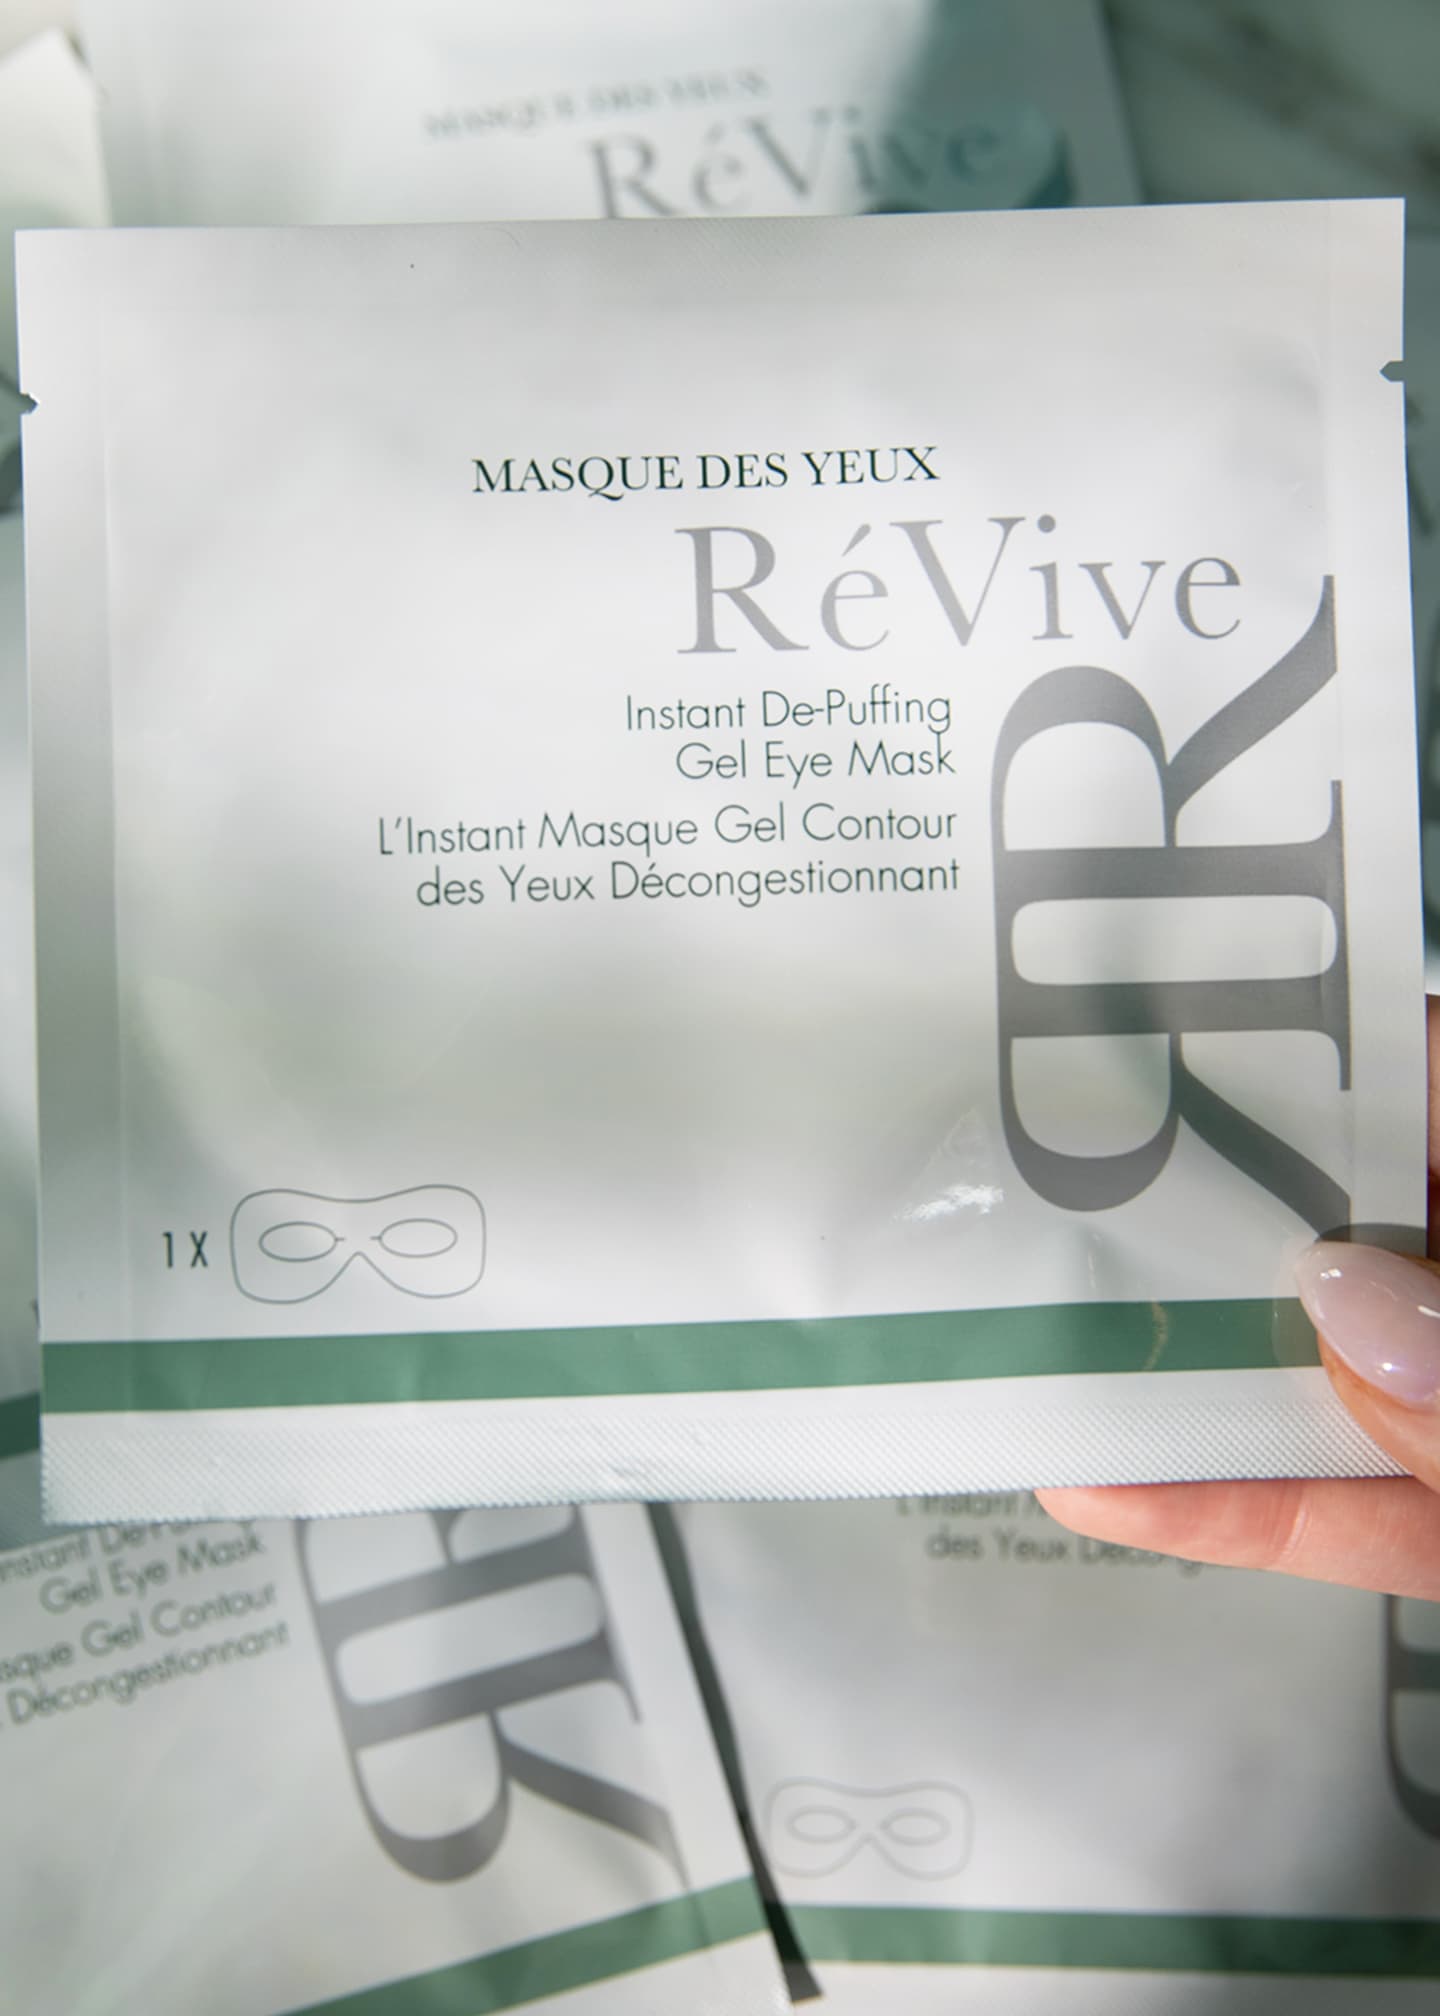 ReVive Masque Des Yeaux Instant De-Puffing Gel Eye Mask, 6 Pack Image 4 of 5